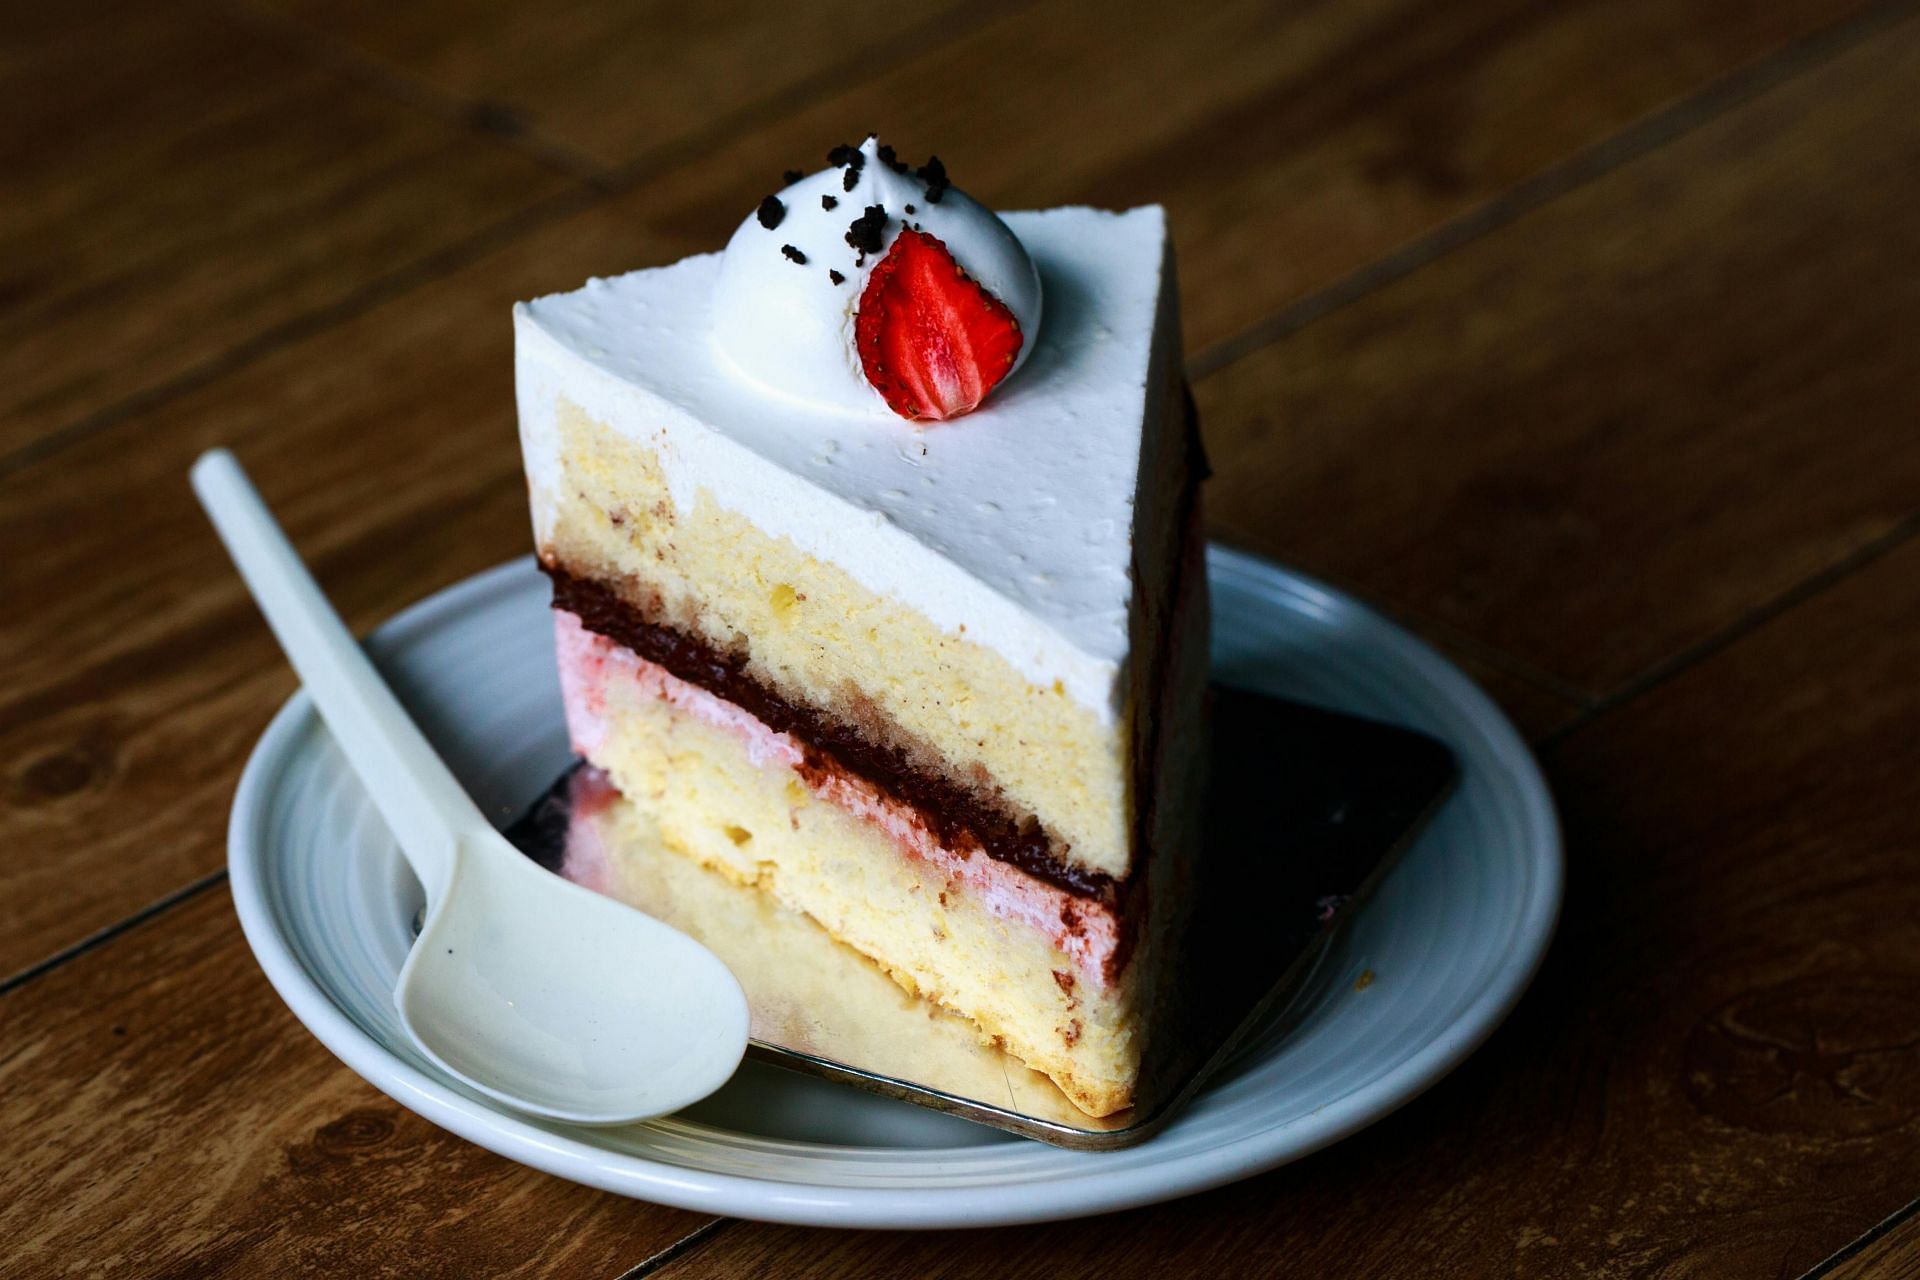 healthy dinner desserts (image sourced via Pexels / Photo by quang)